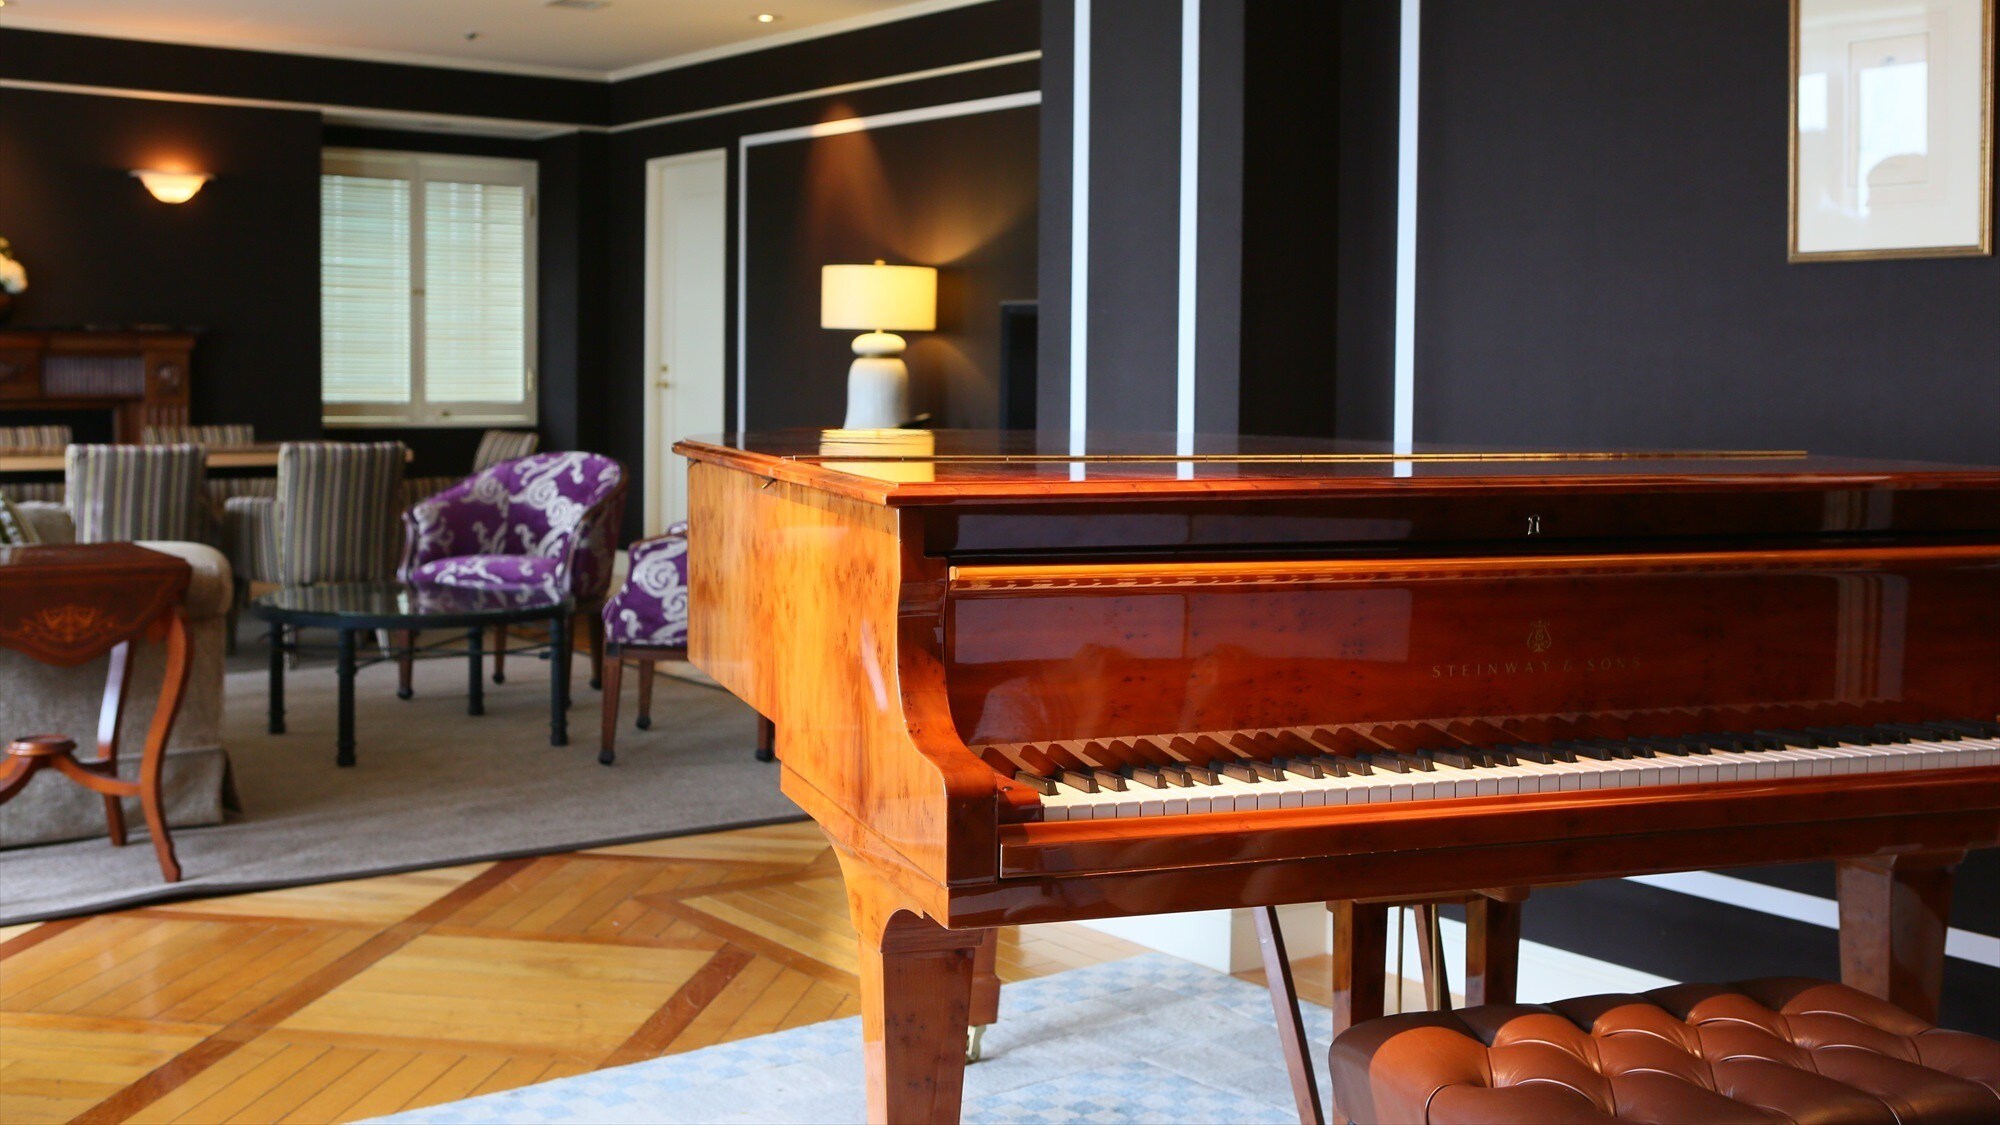 ◆Royal Suite｜A premium room with a Steinway & Sons grand piano.